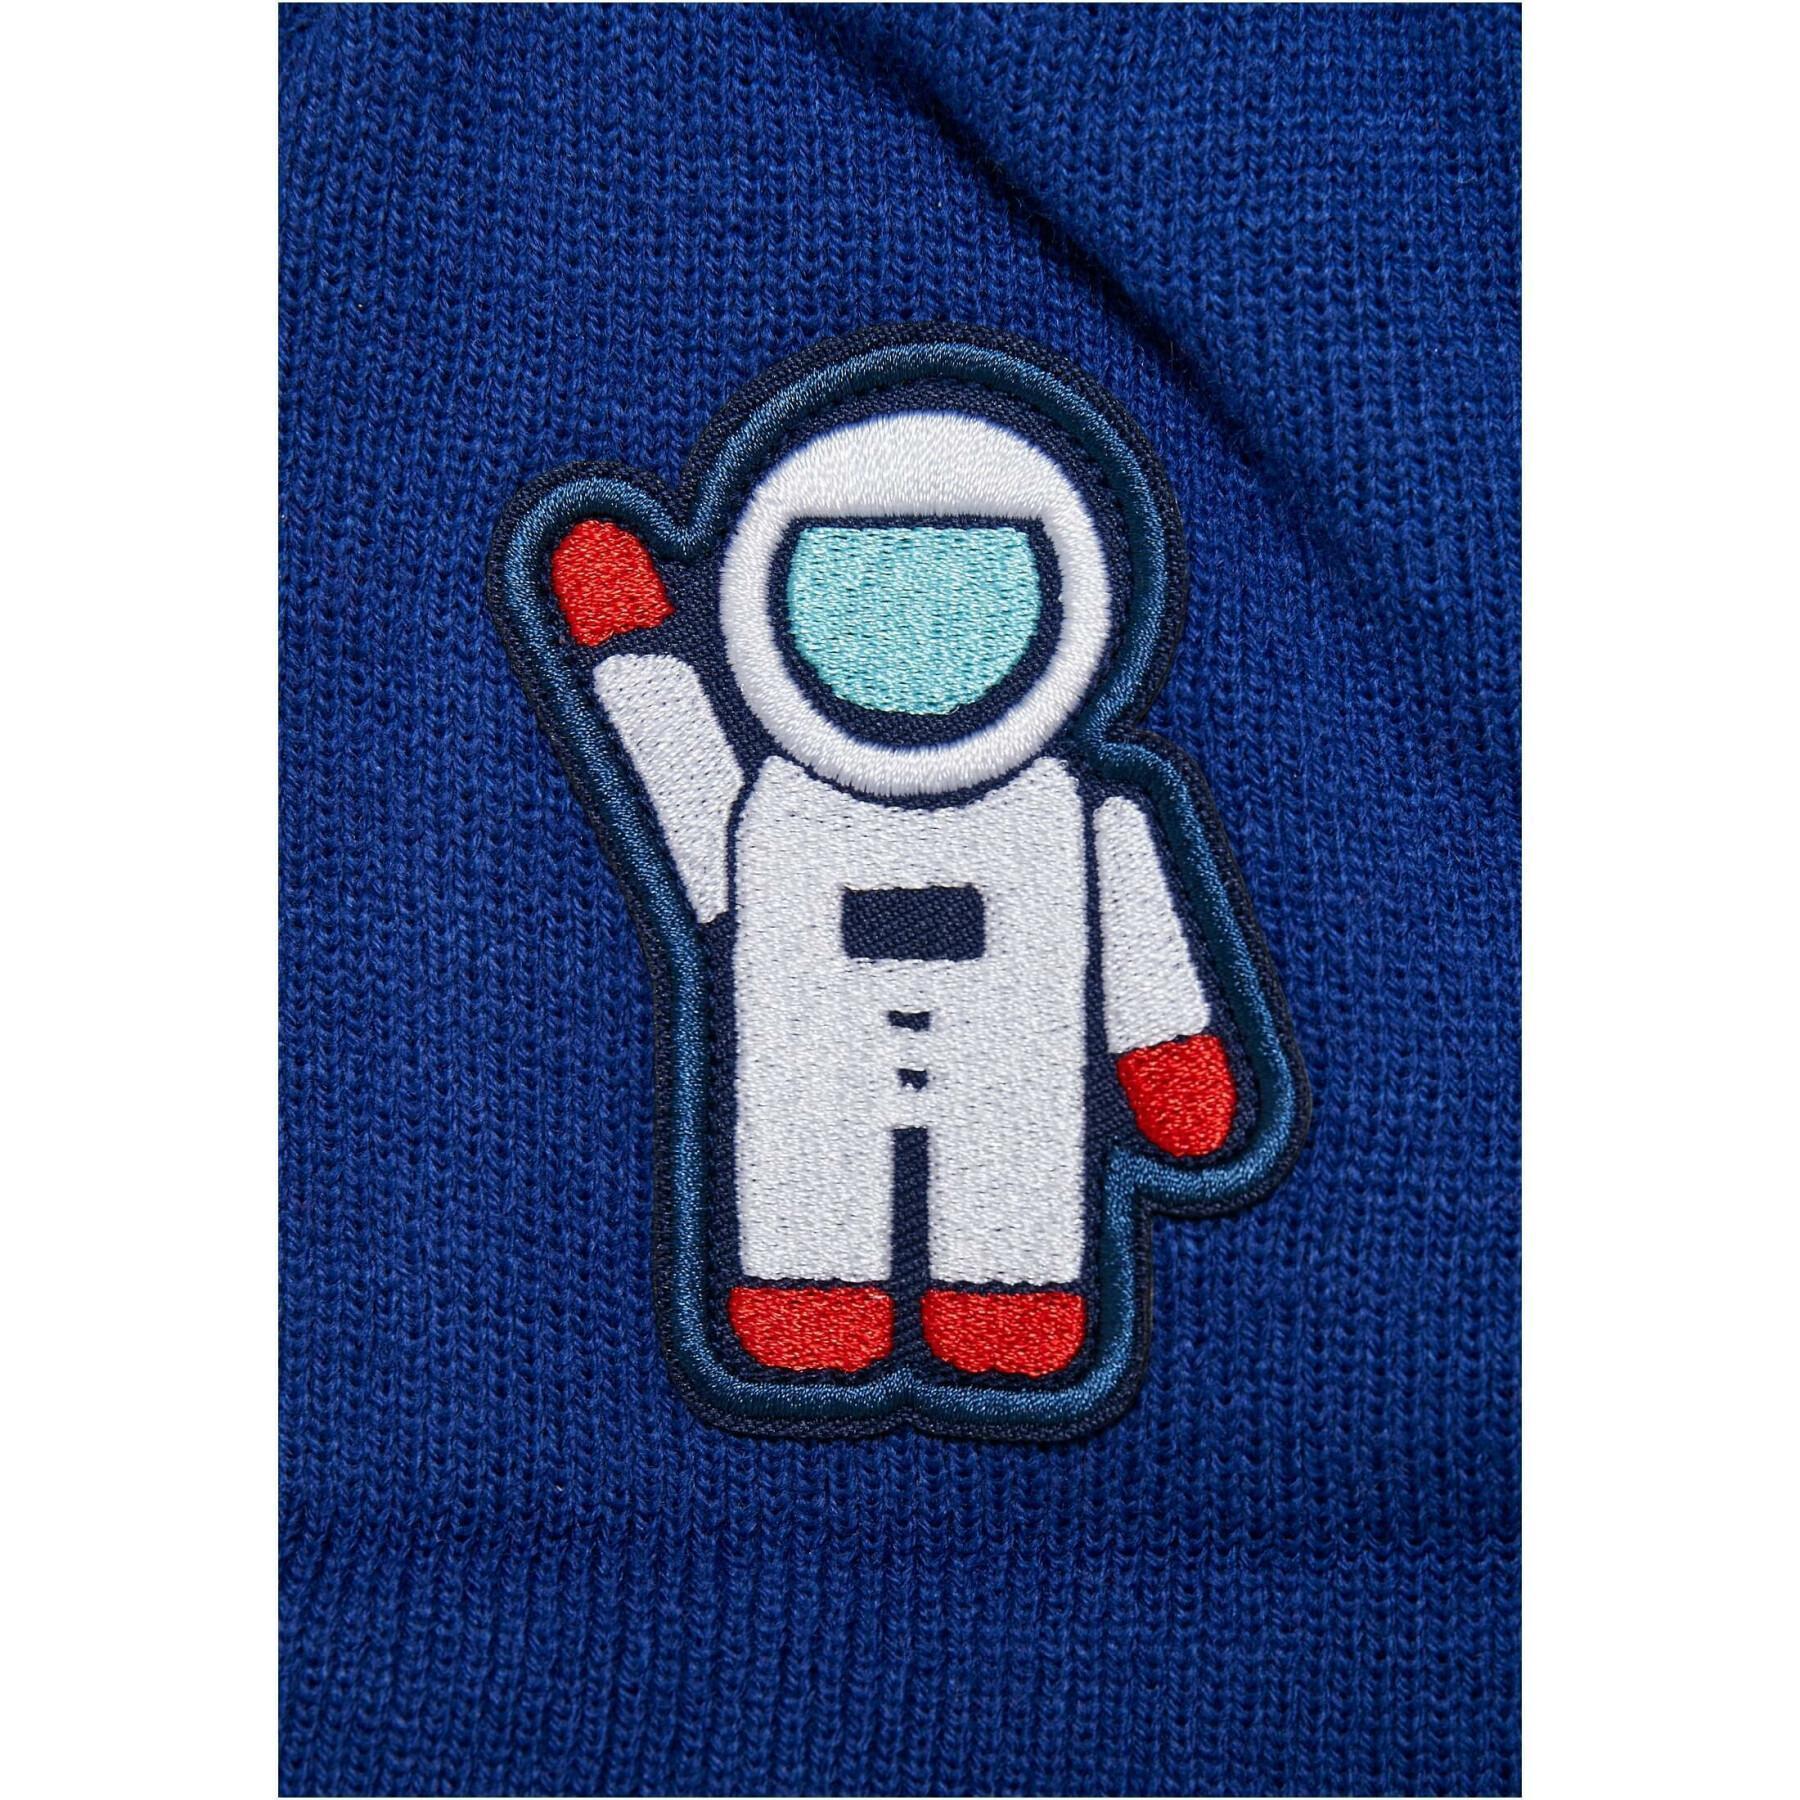 Embroidered hat Mister Tee Nasa